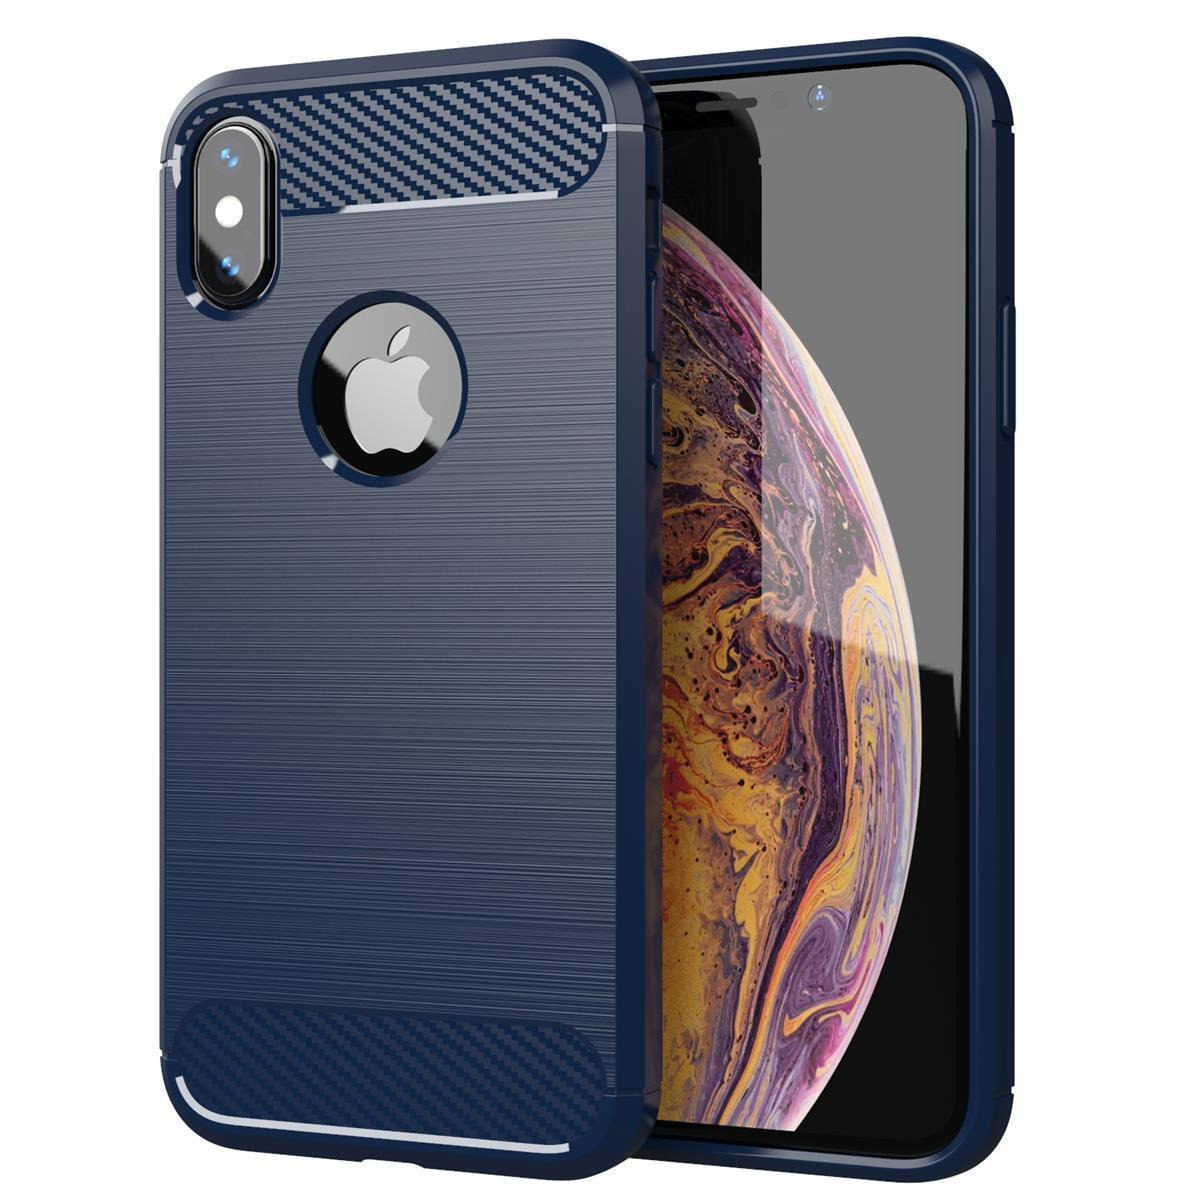 Apple, Backcover, BLAU CADORABO XS Ultra MAX, BRUSHED Carbon iPhone Hülle, TPU Slim